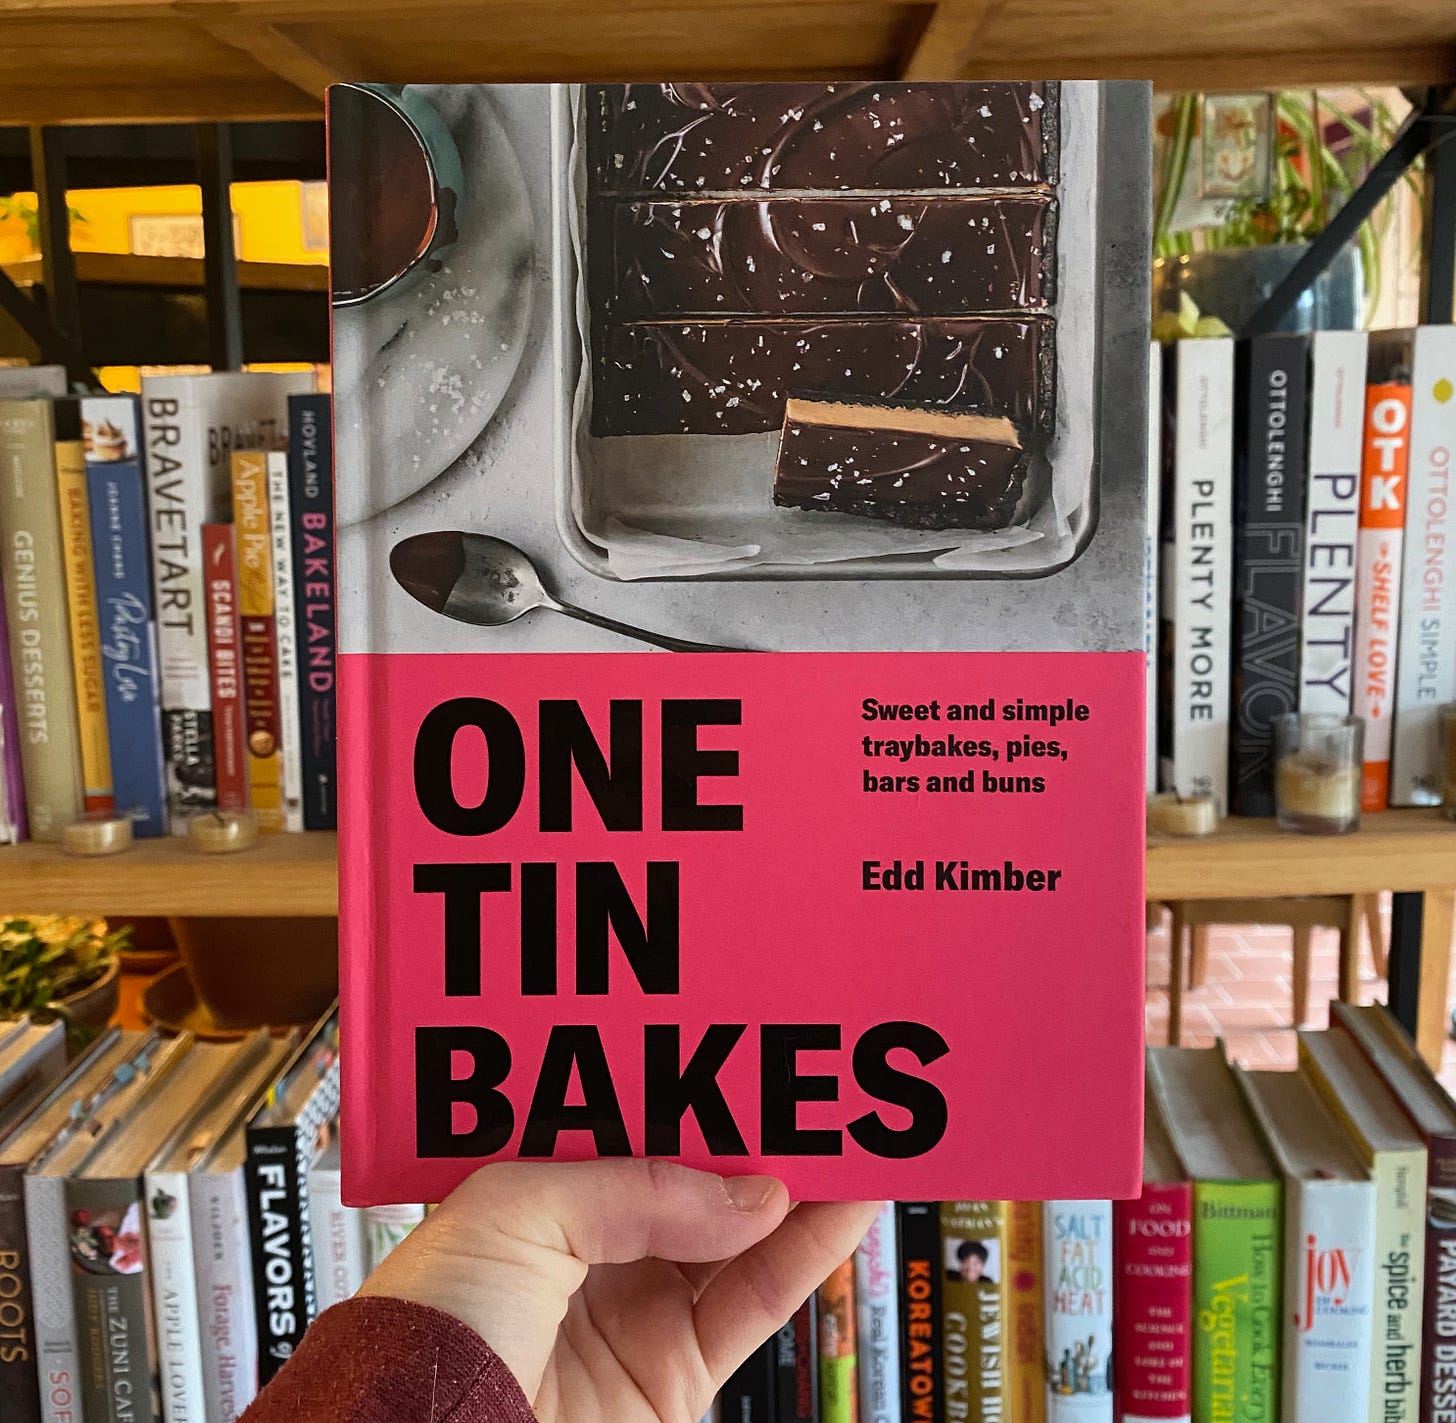 My hand holding One Tin Bakes in front of a shelf full of cookbooks.